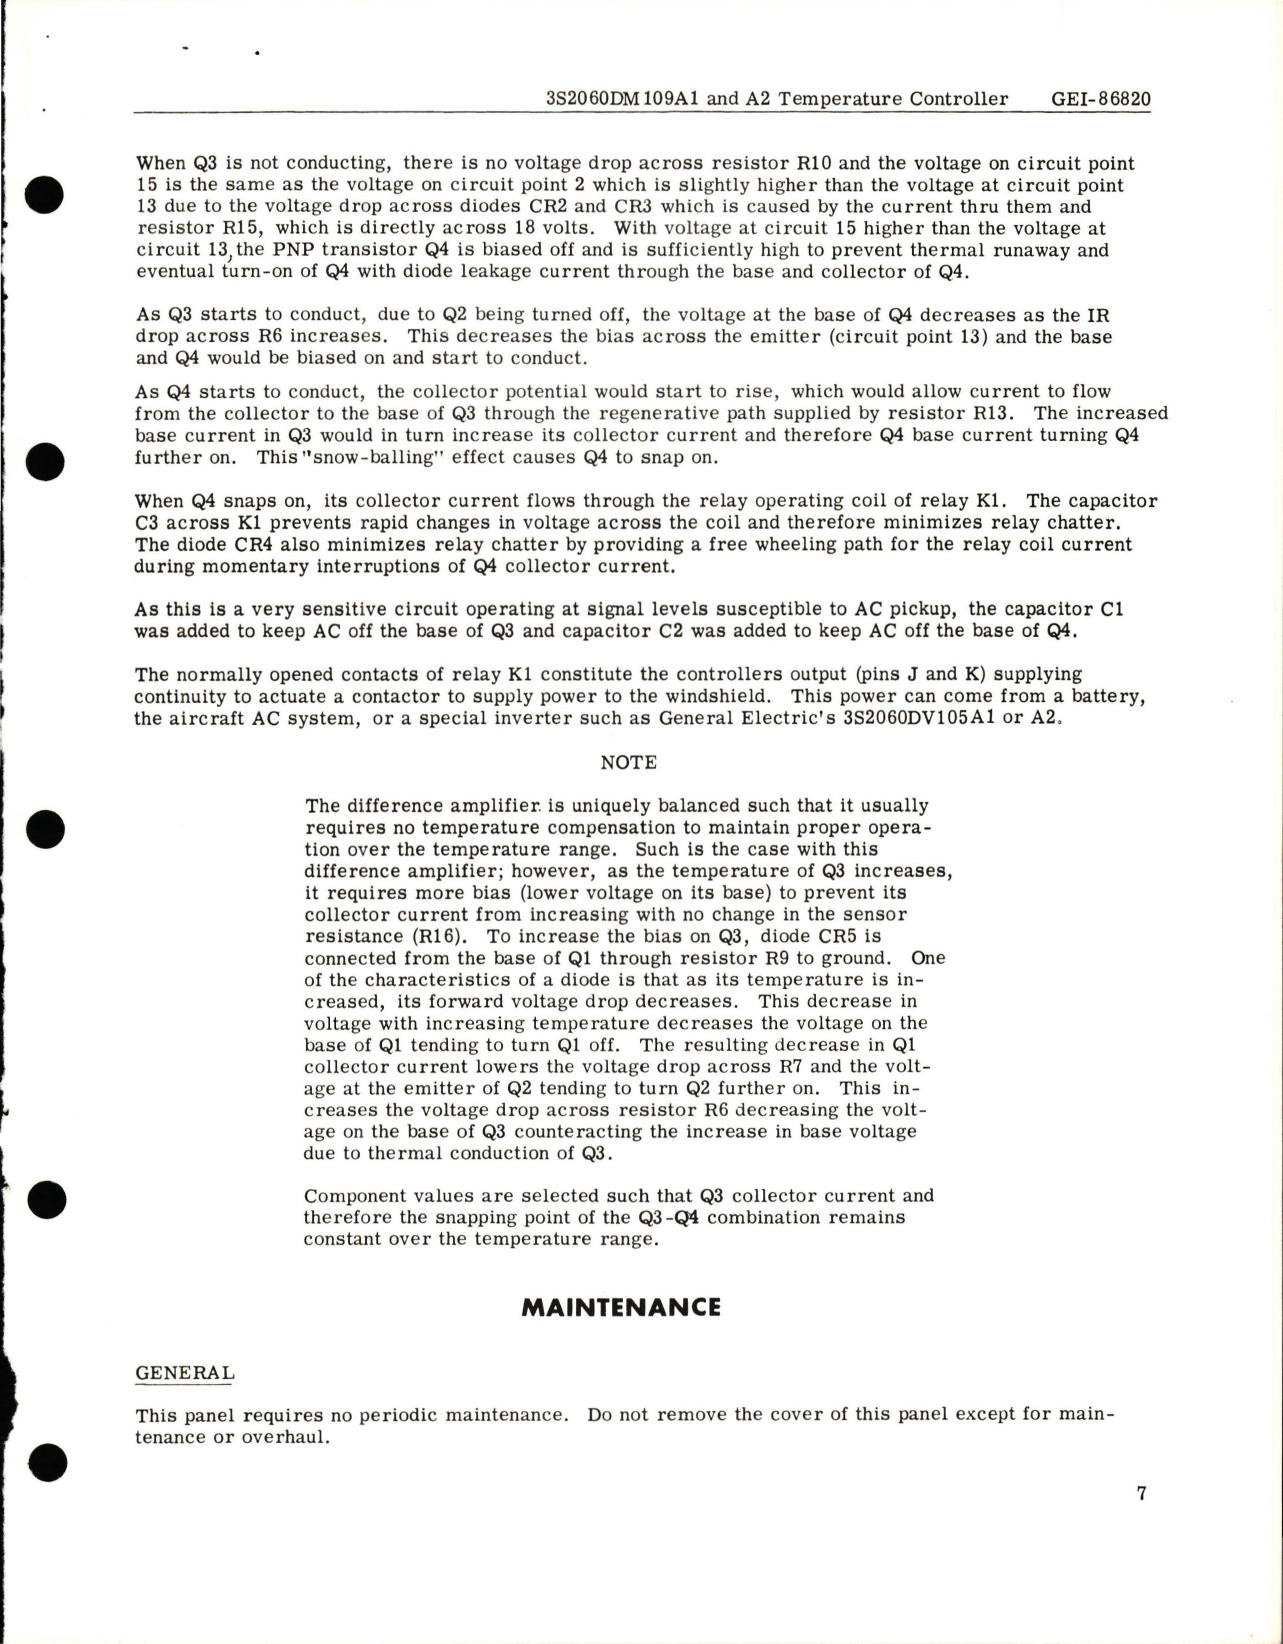 Sample page 7 from AirCorps Library document: Instructions for Temperature Controller - 3S2060DM109A1 and A2 